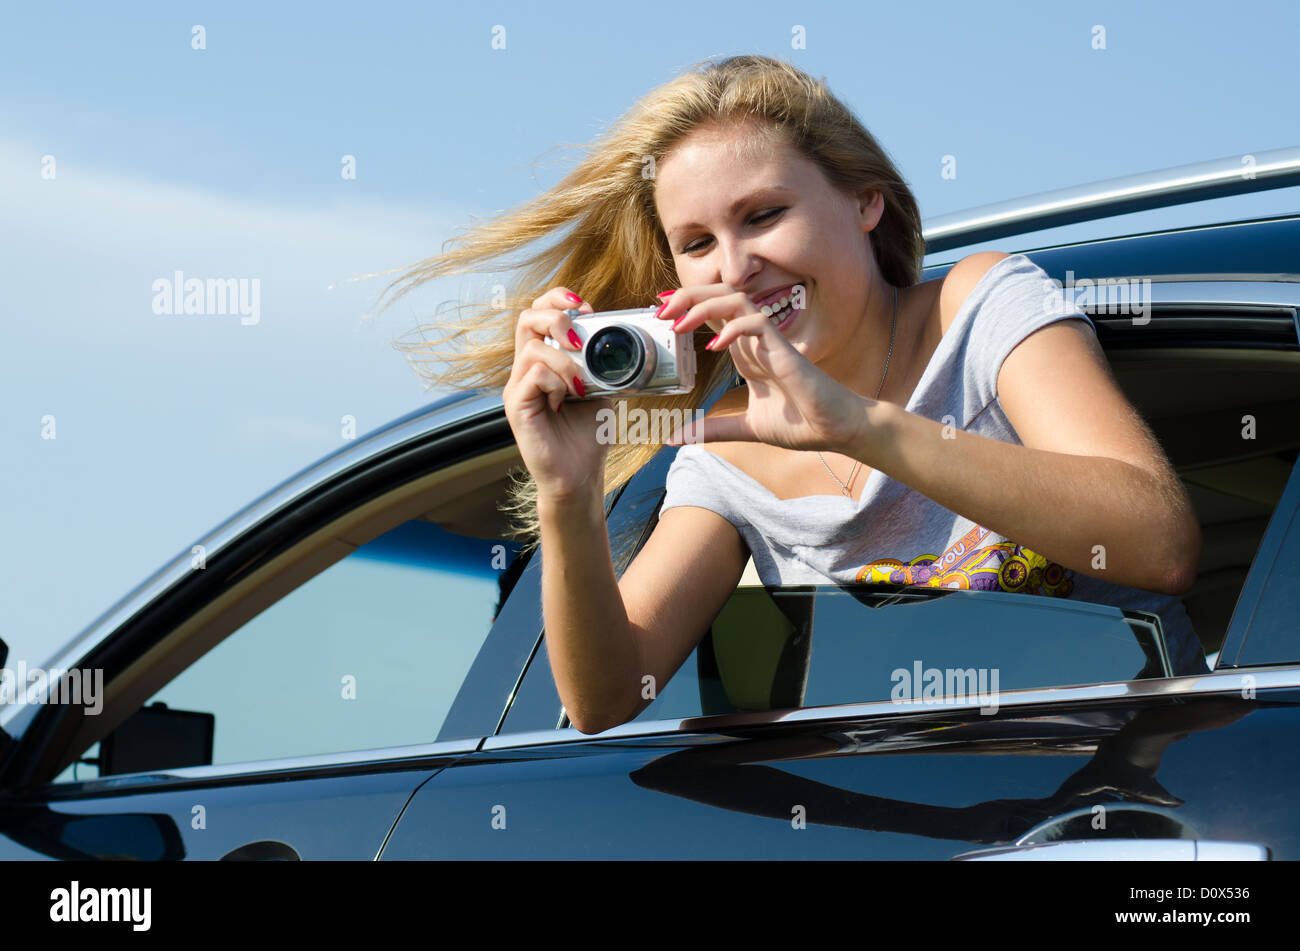 Laughing woman taking digital photographs leaning out of the rear passenger window of a motor car Stock Photo